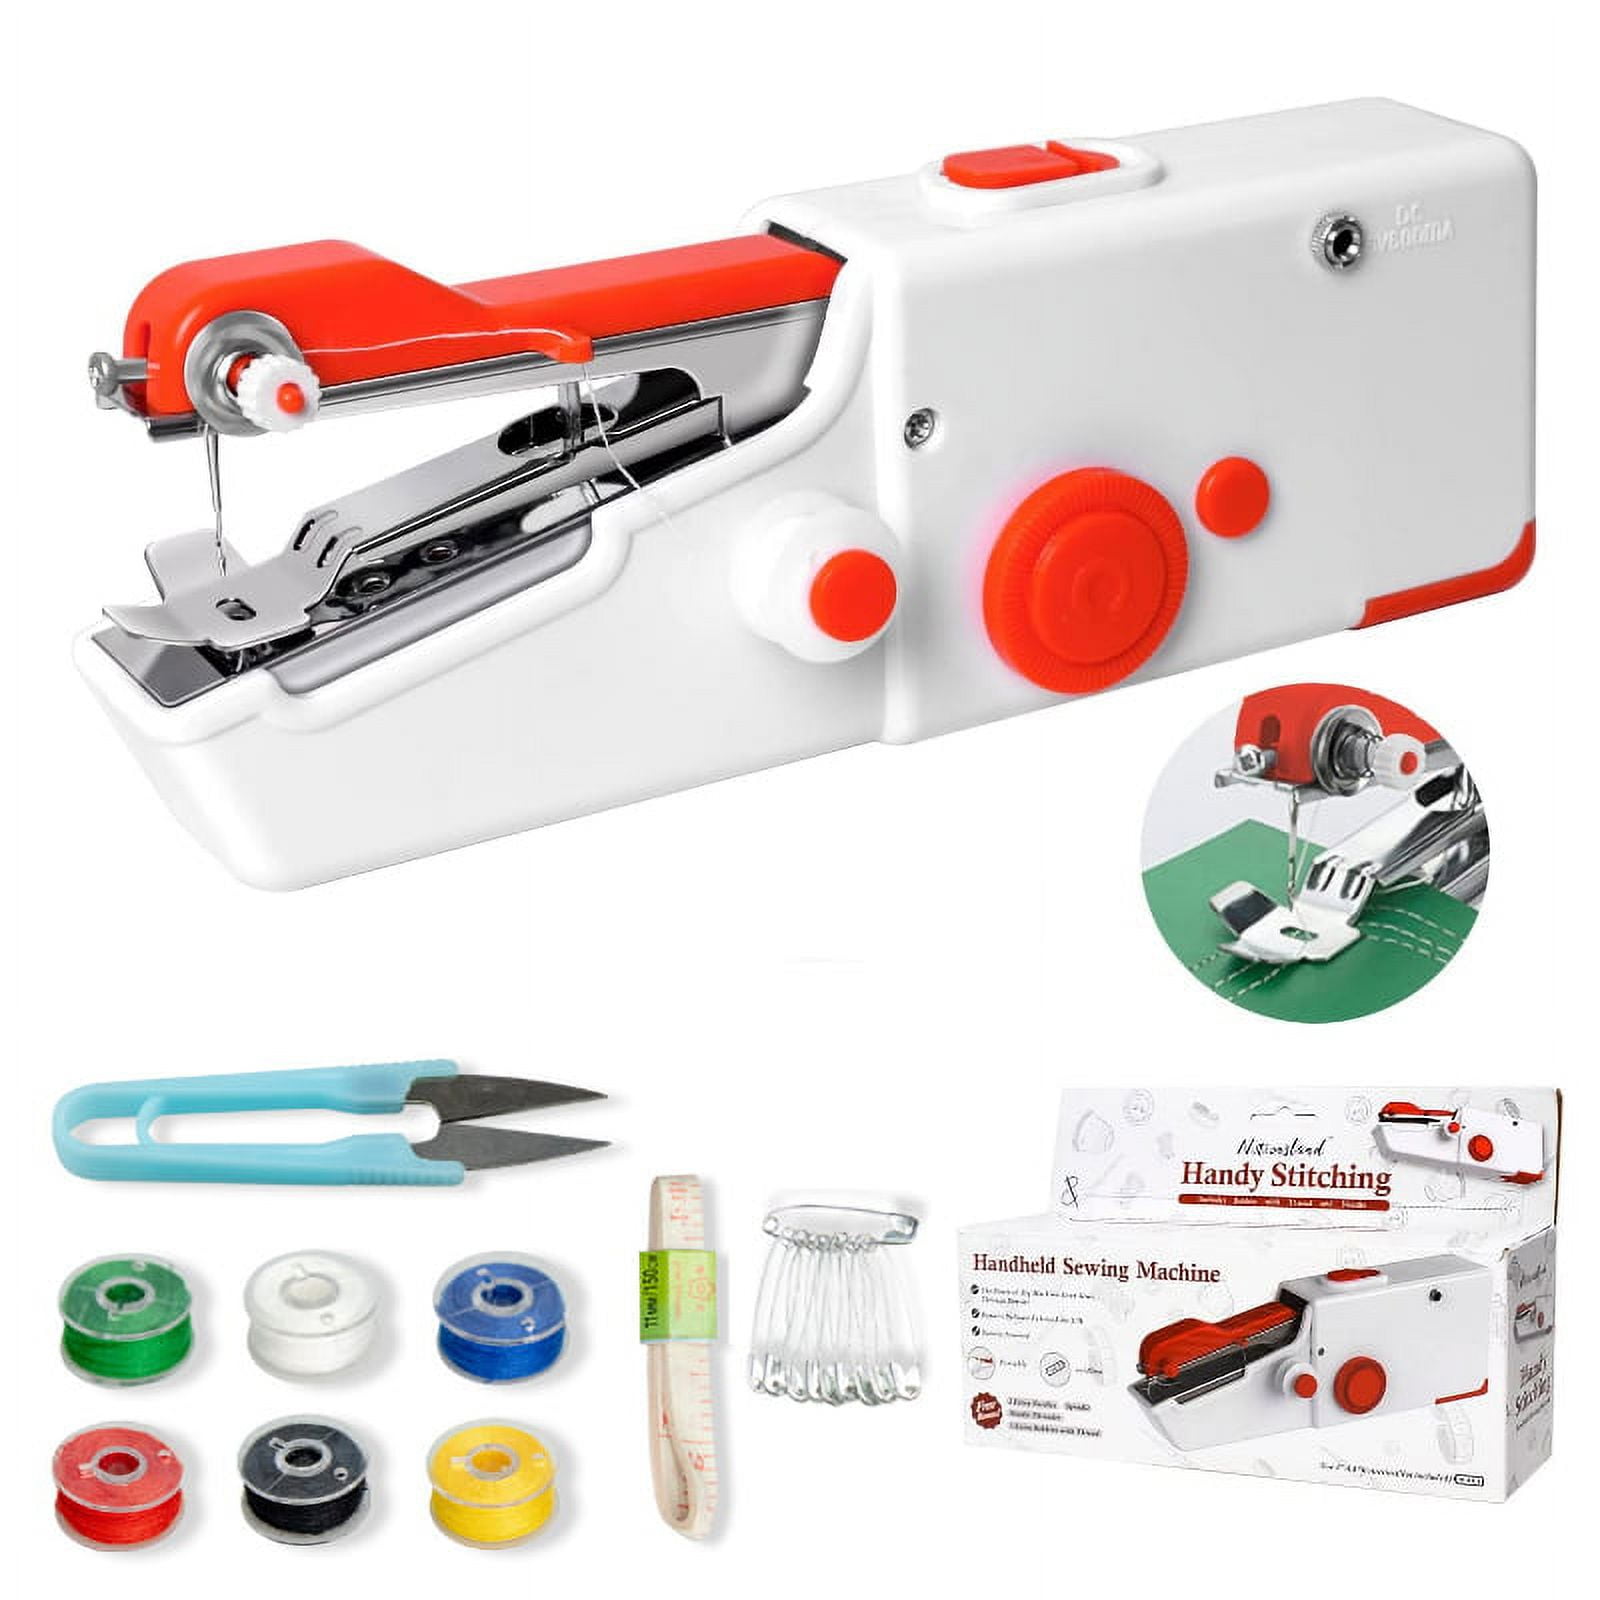 Handheld Sewing Machine, Mini Handheld Sewing Machine for Quick  Stitching,Portable Sewing Machine Suitable for Home,Travel and DIY,Electric  Handheld